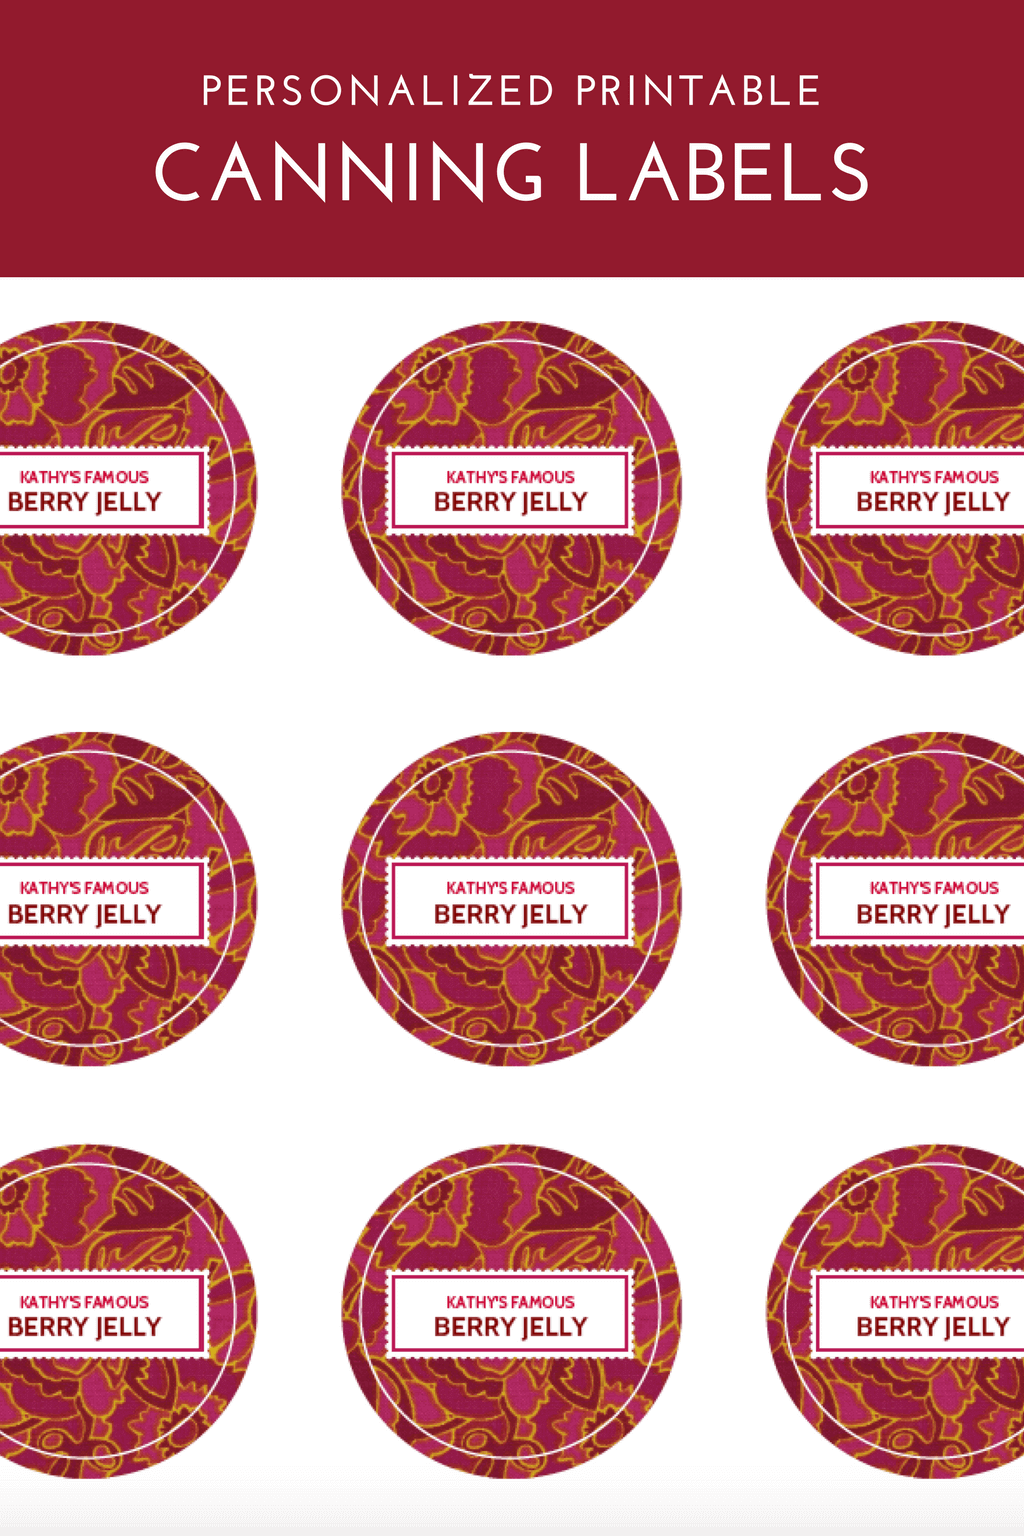 Canning label template in five cheery colors - Merriment Design Intended For Chutney Label Templates